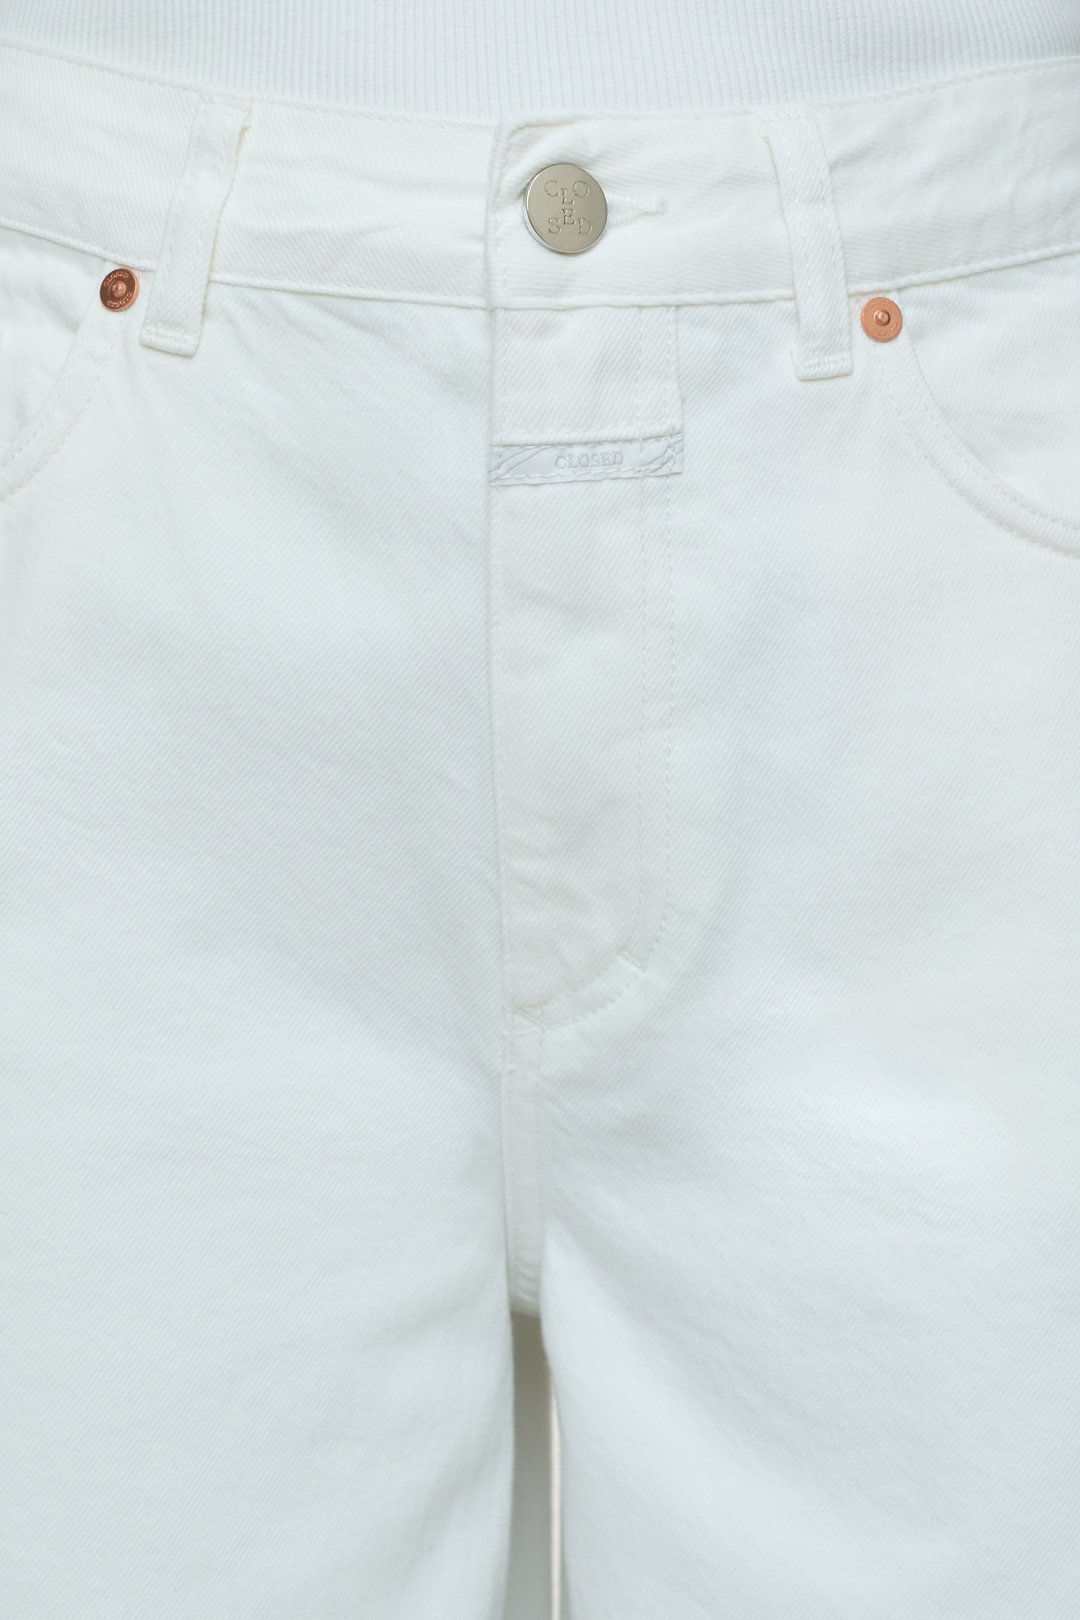 Jeans Lyna white